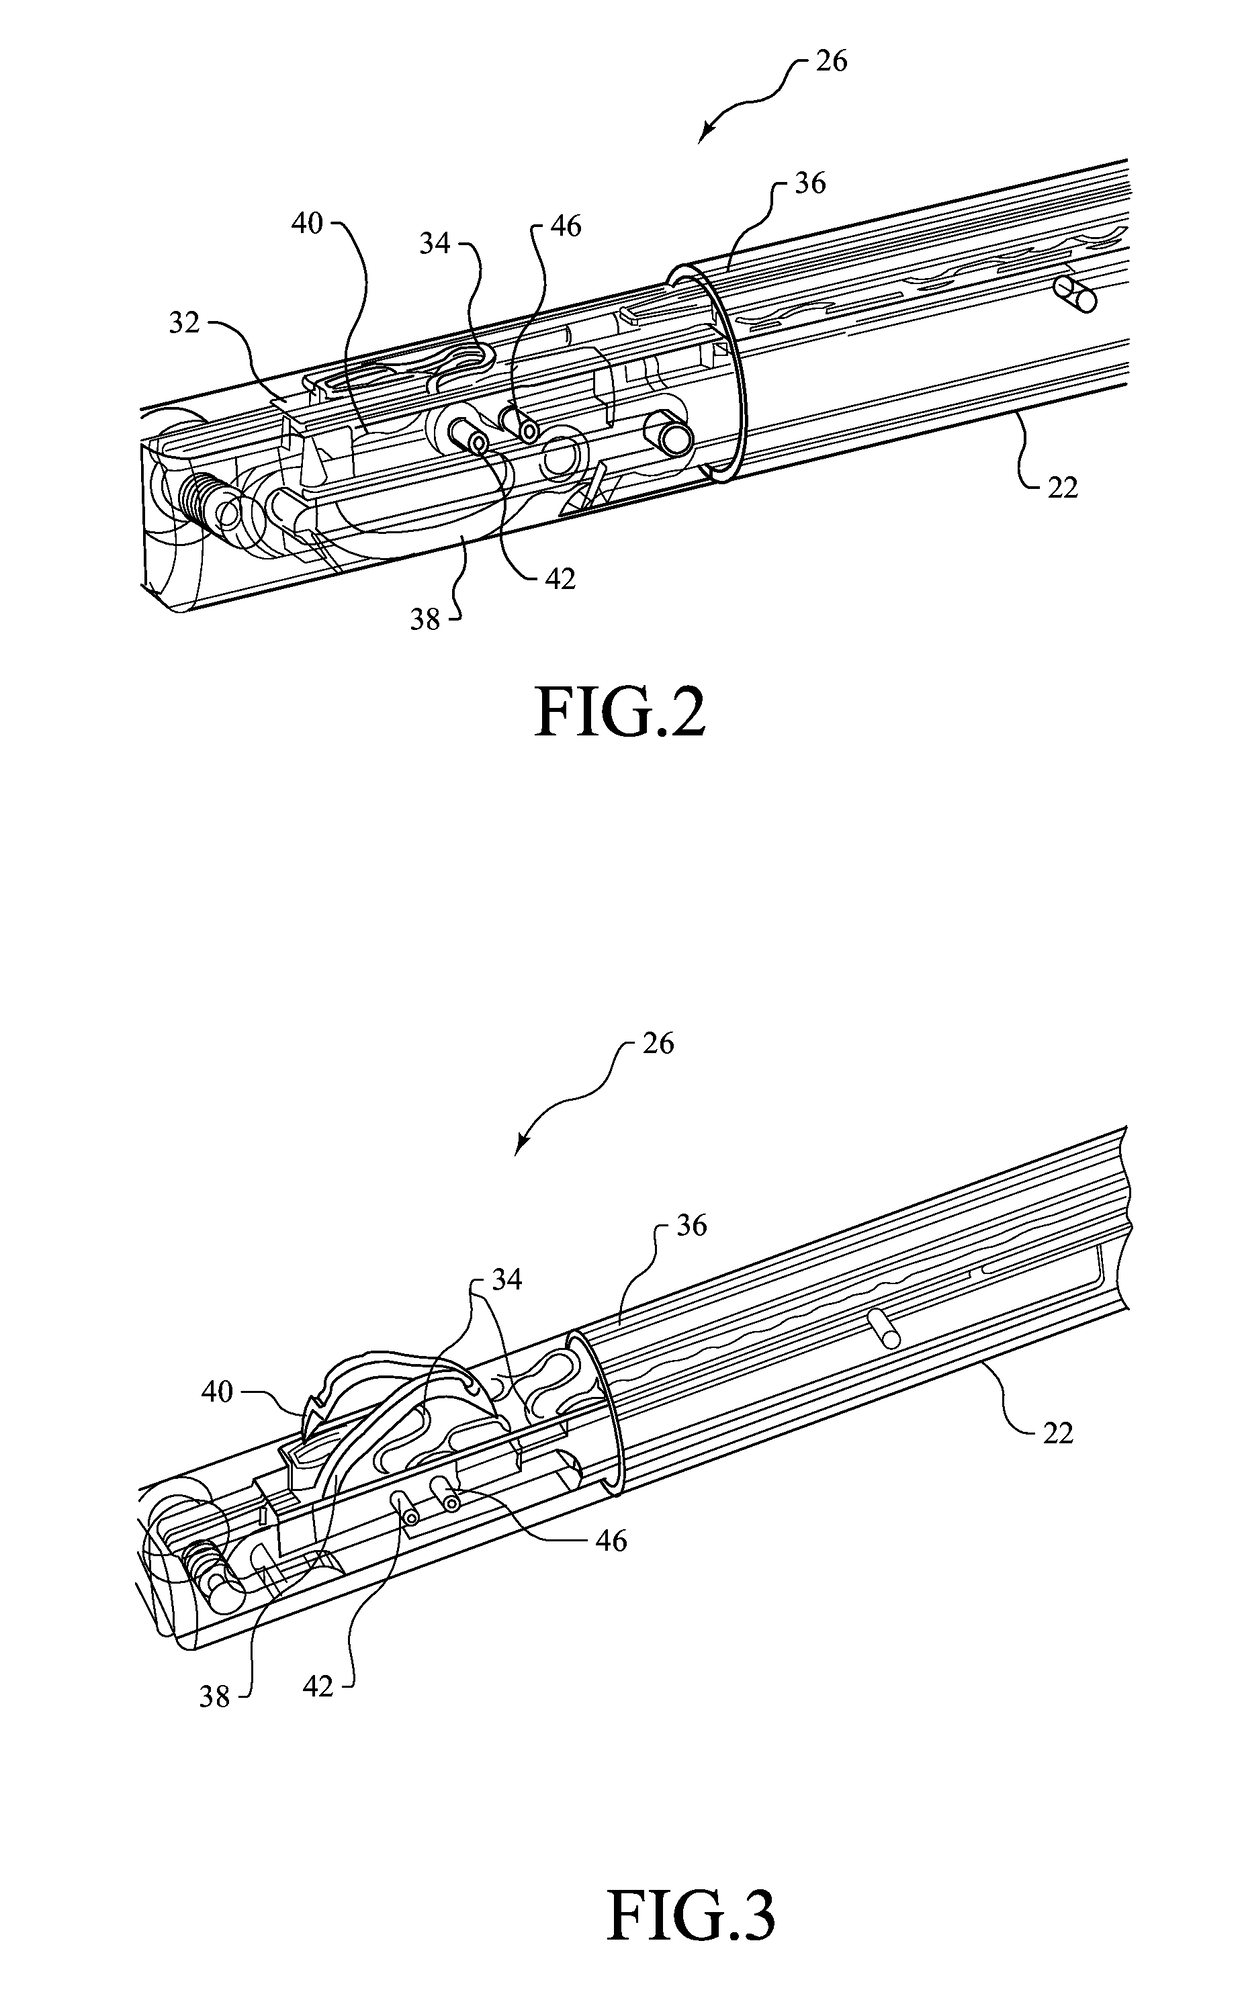 Laparoscopic Suture Device with Autoloading and Suture Capture